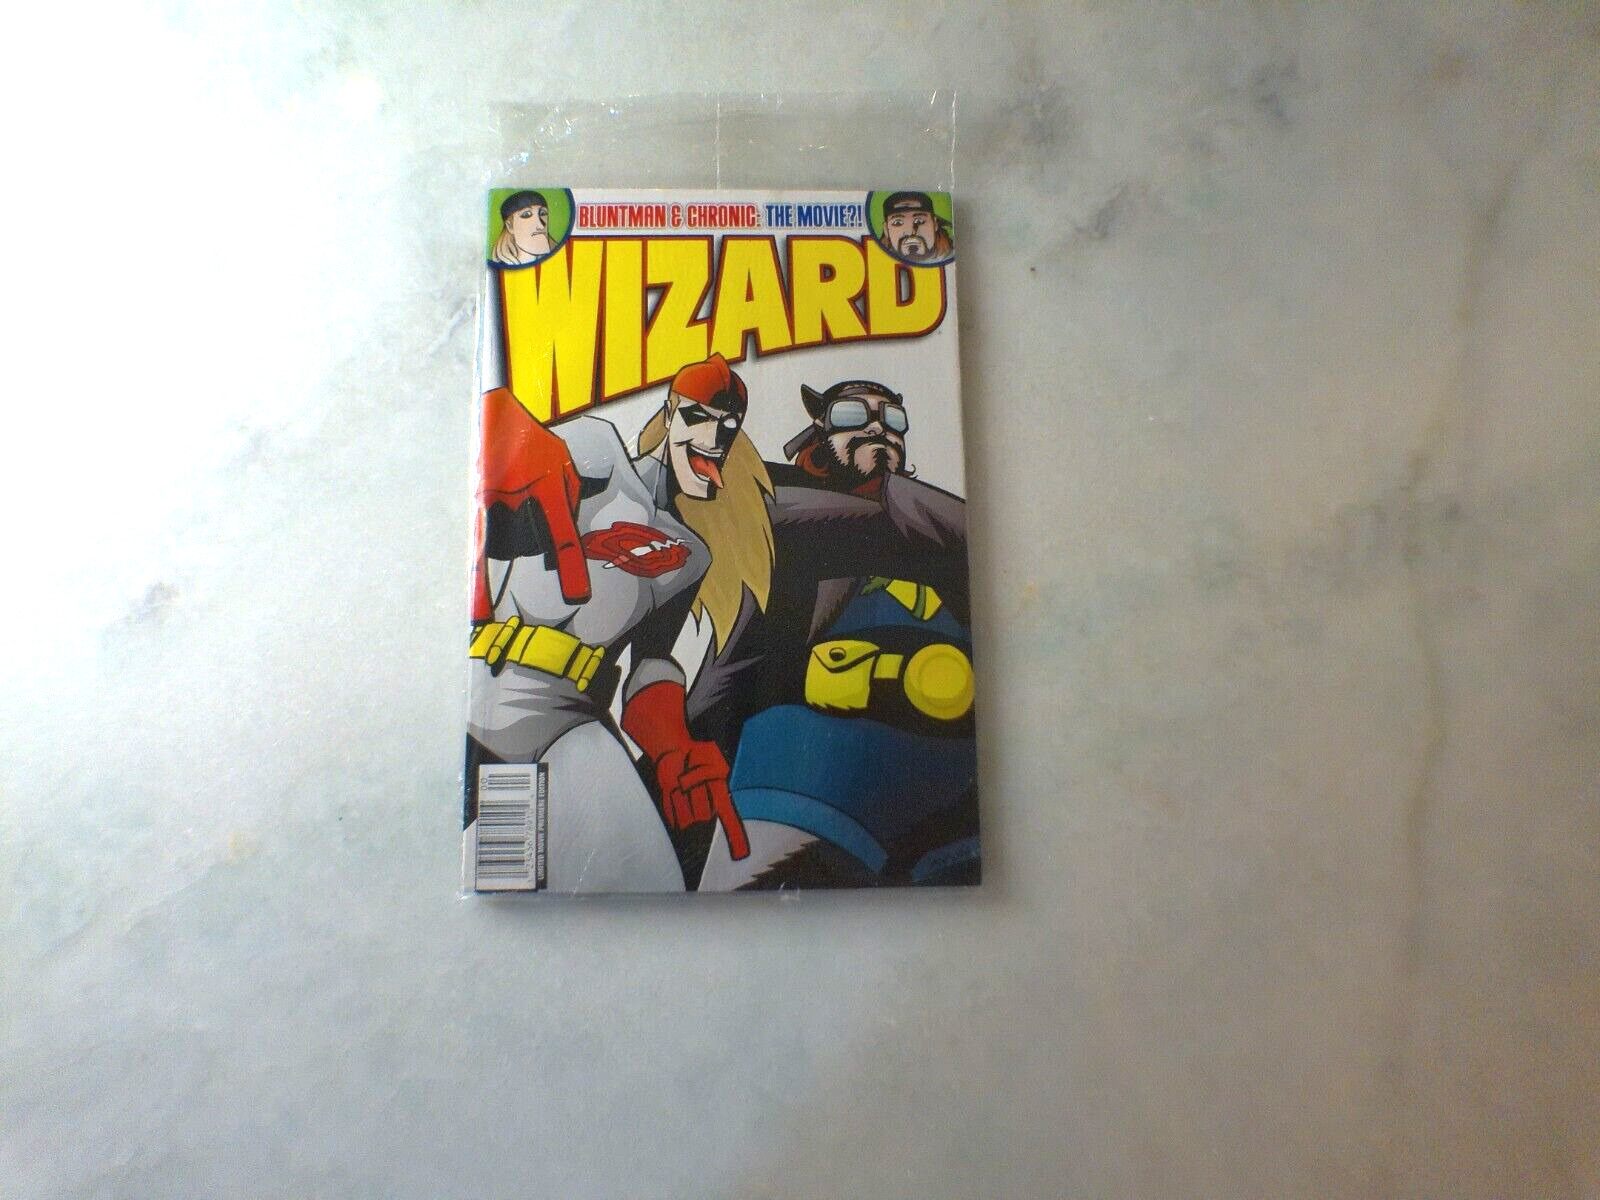 Wizard Magazine #120 (Sept 2001) Bluntman and Chronic cover W/CD